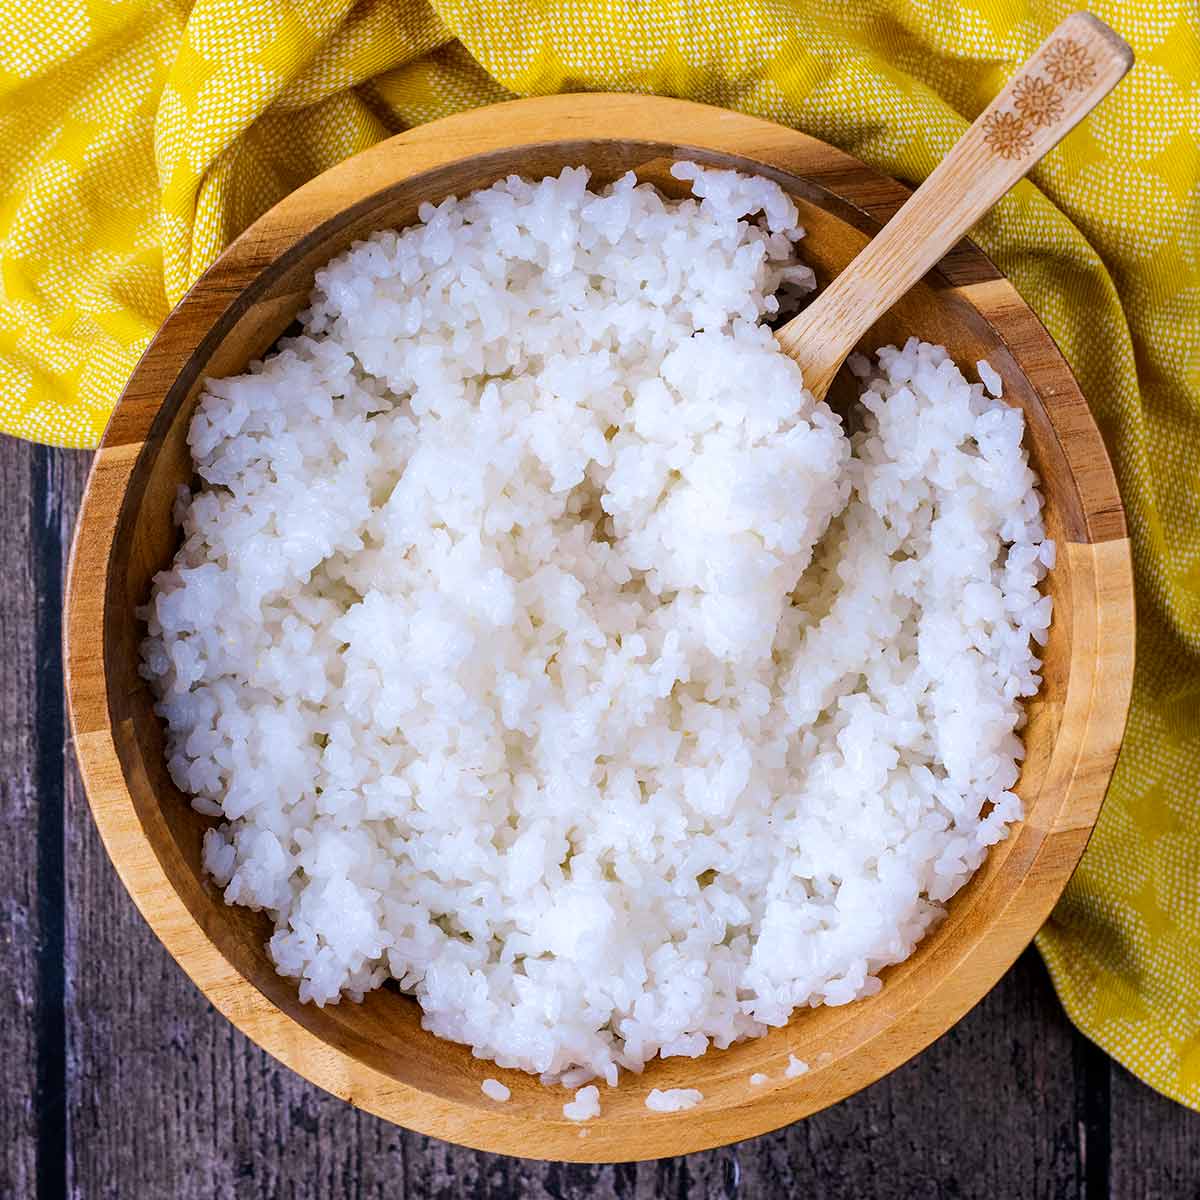 https://hungryhealthyhappy.com/wp-content/uploads/2023/05/how-to-make-sushi-rice-featured-b.jpg